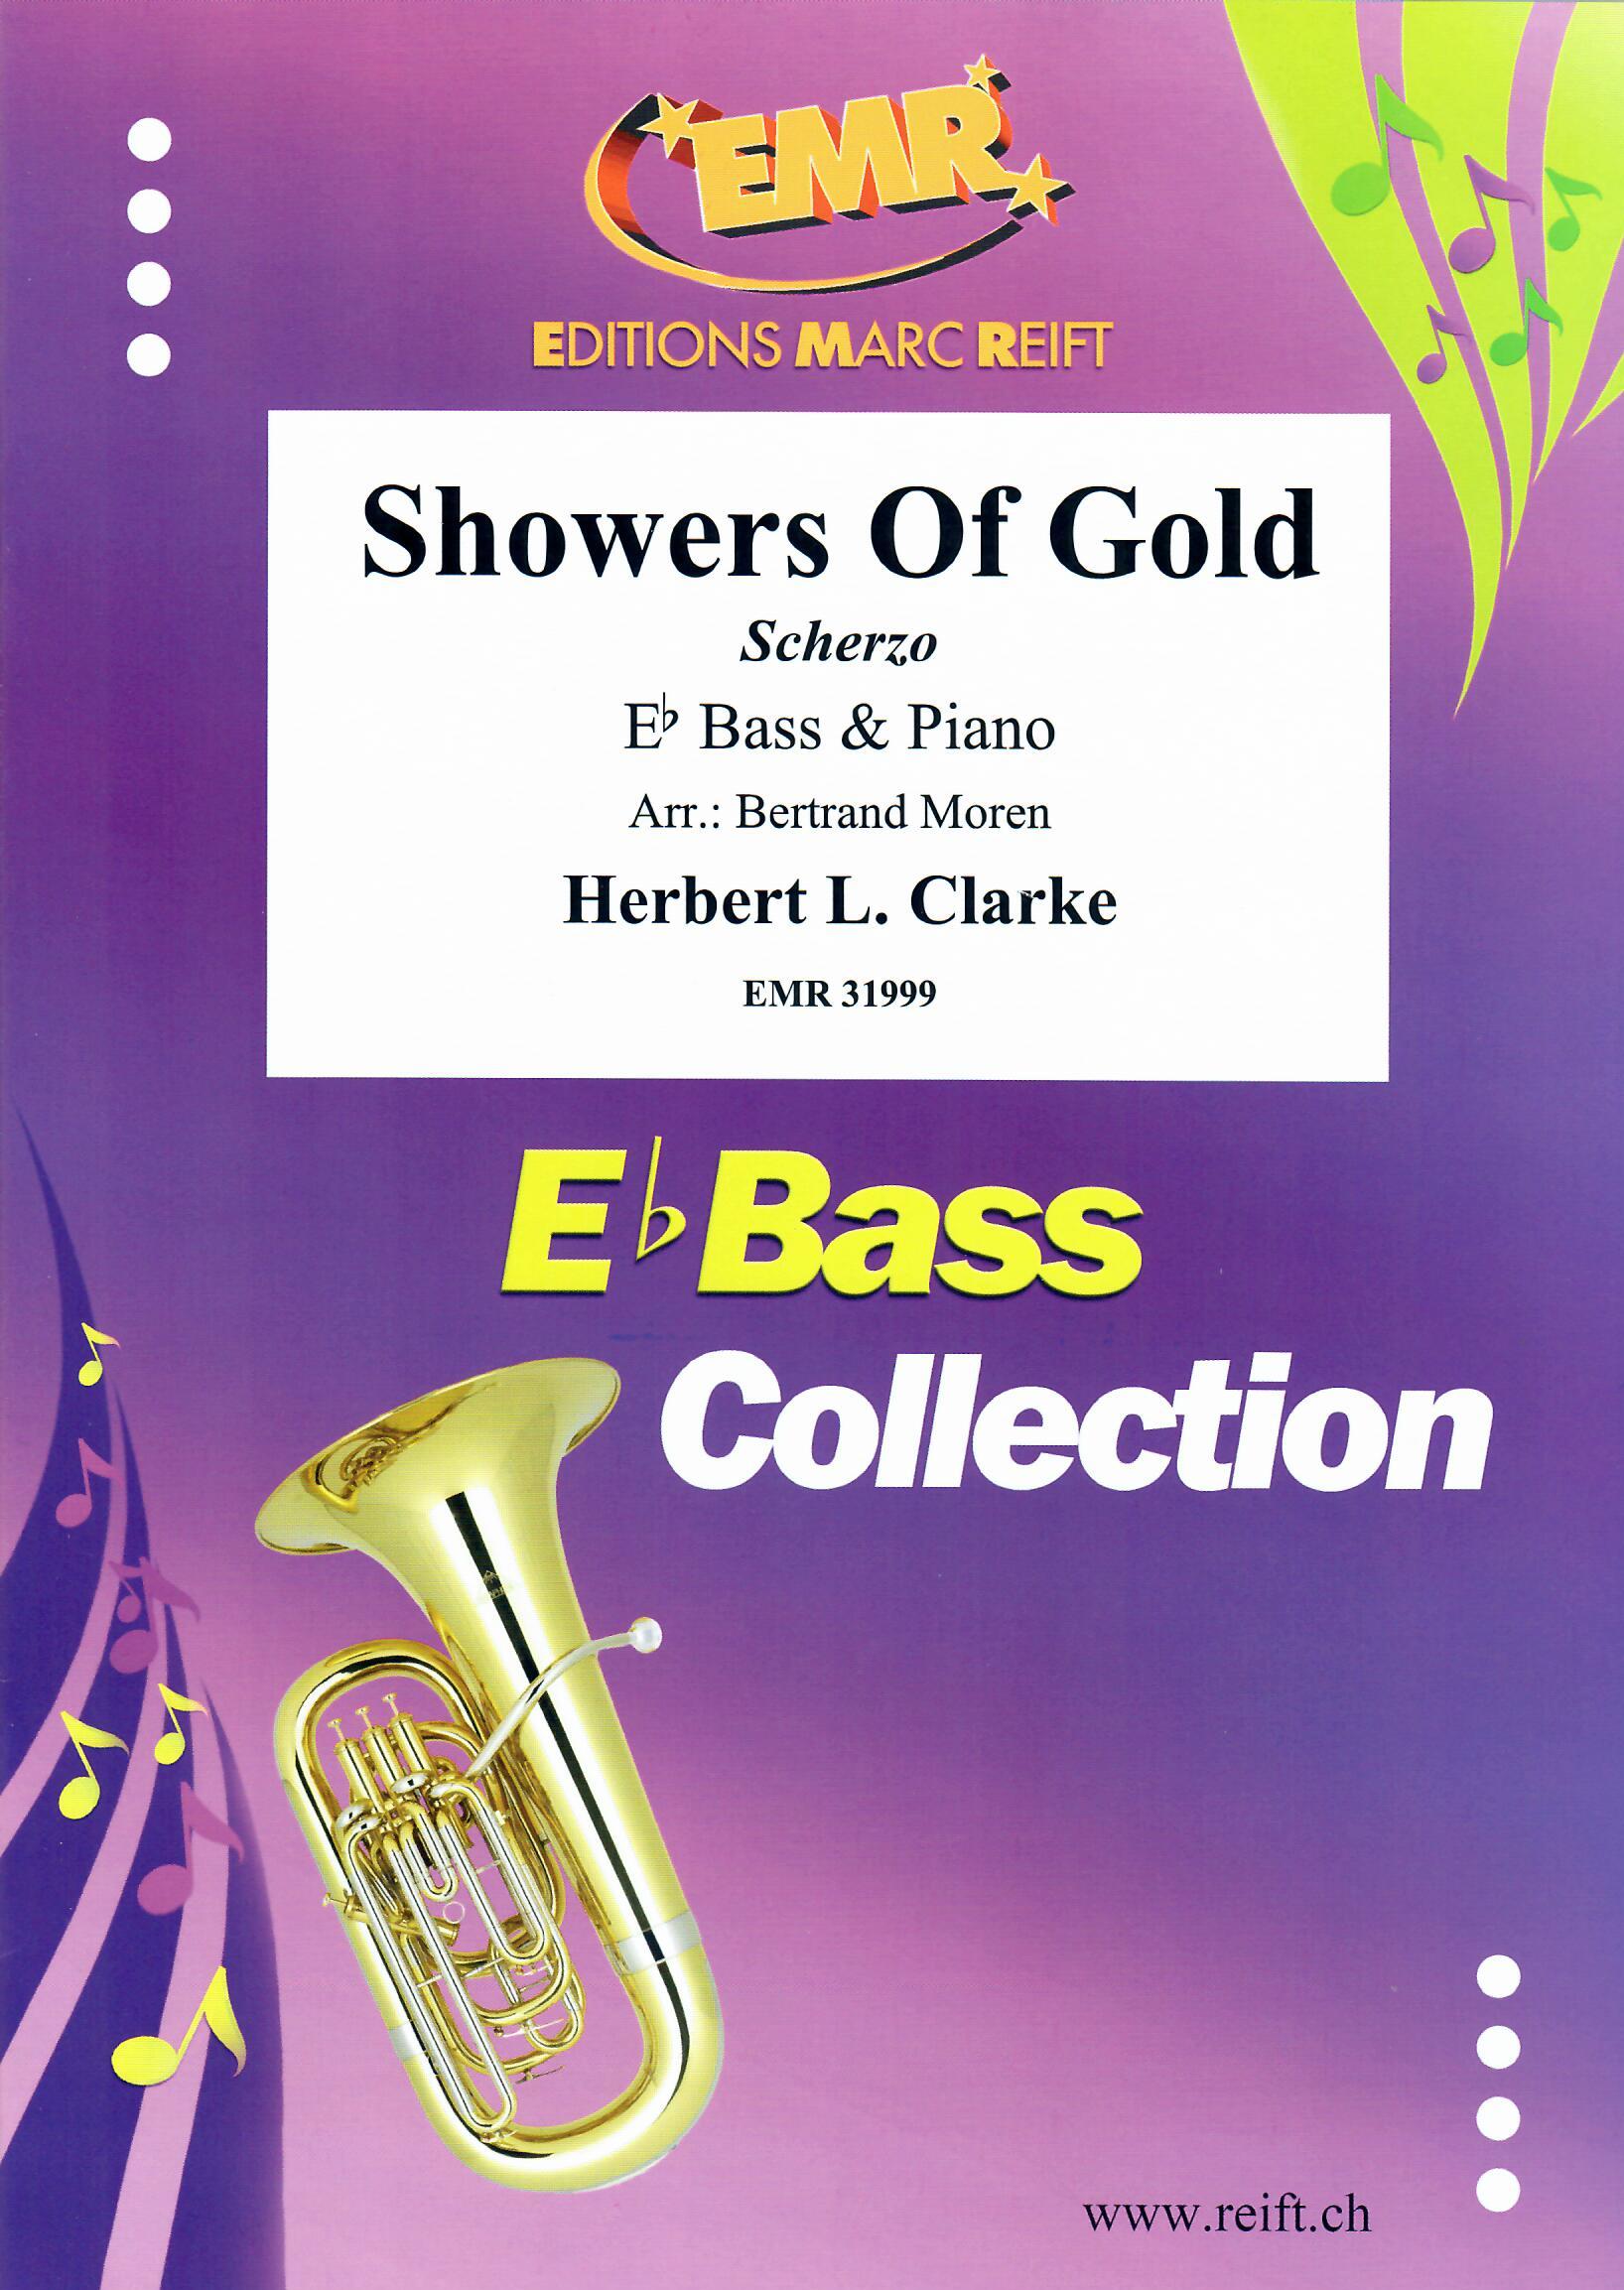 SHOWERS OF GOLD, SOLOS - E♭. Bass